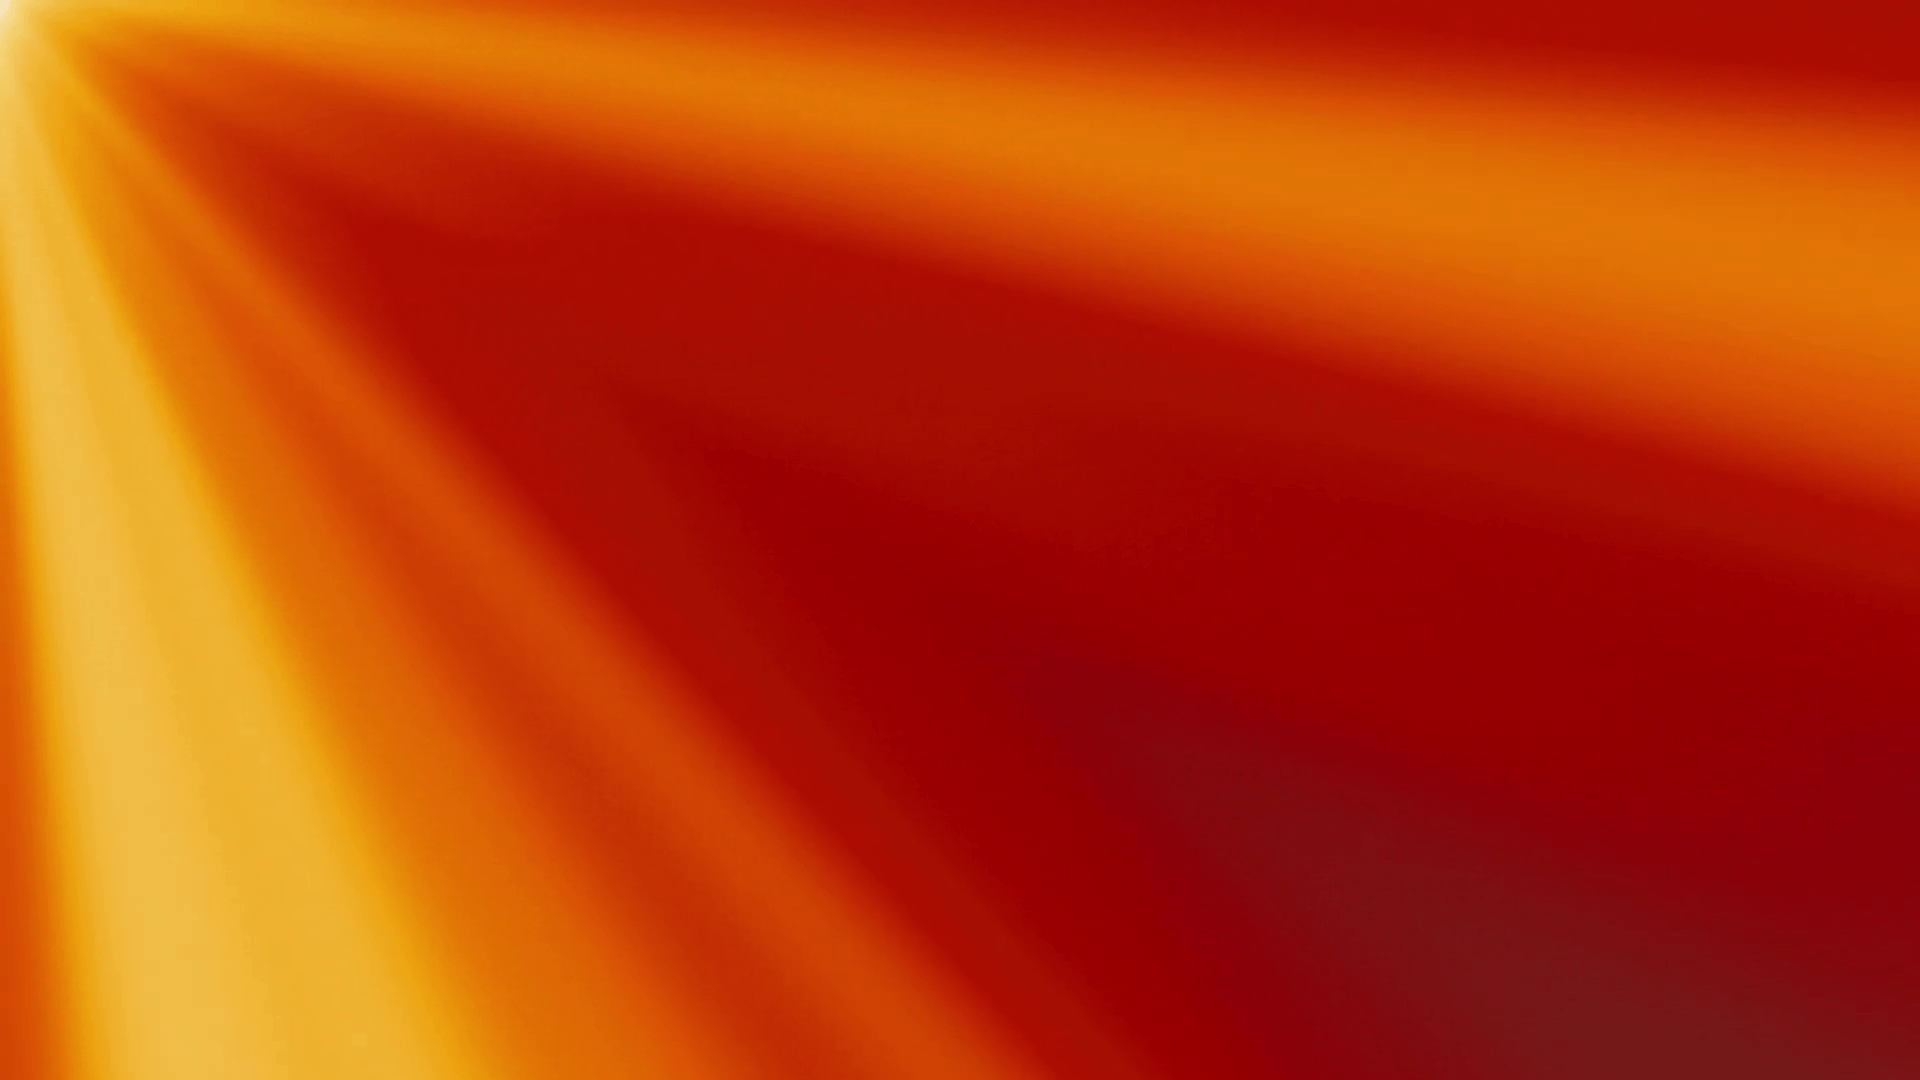 Looping clip of yellow and orange light rays on a red background